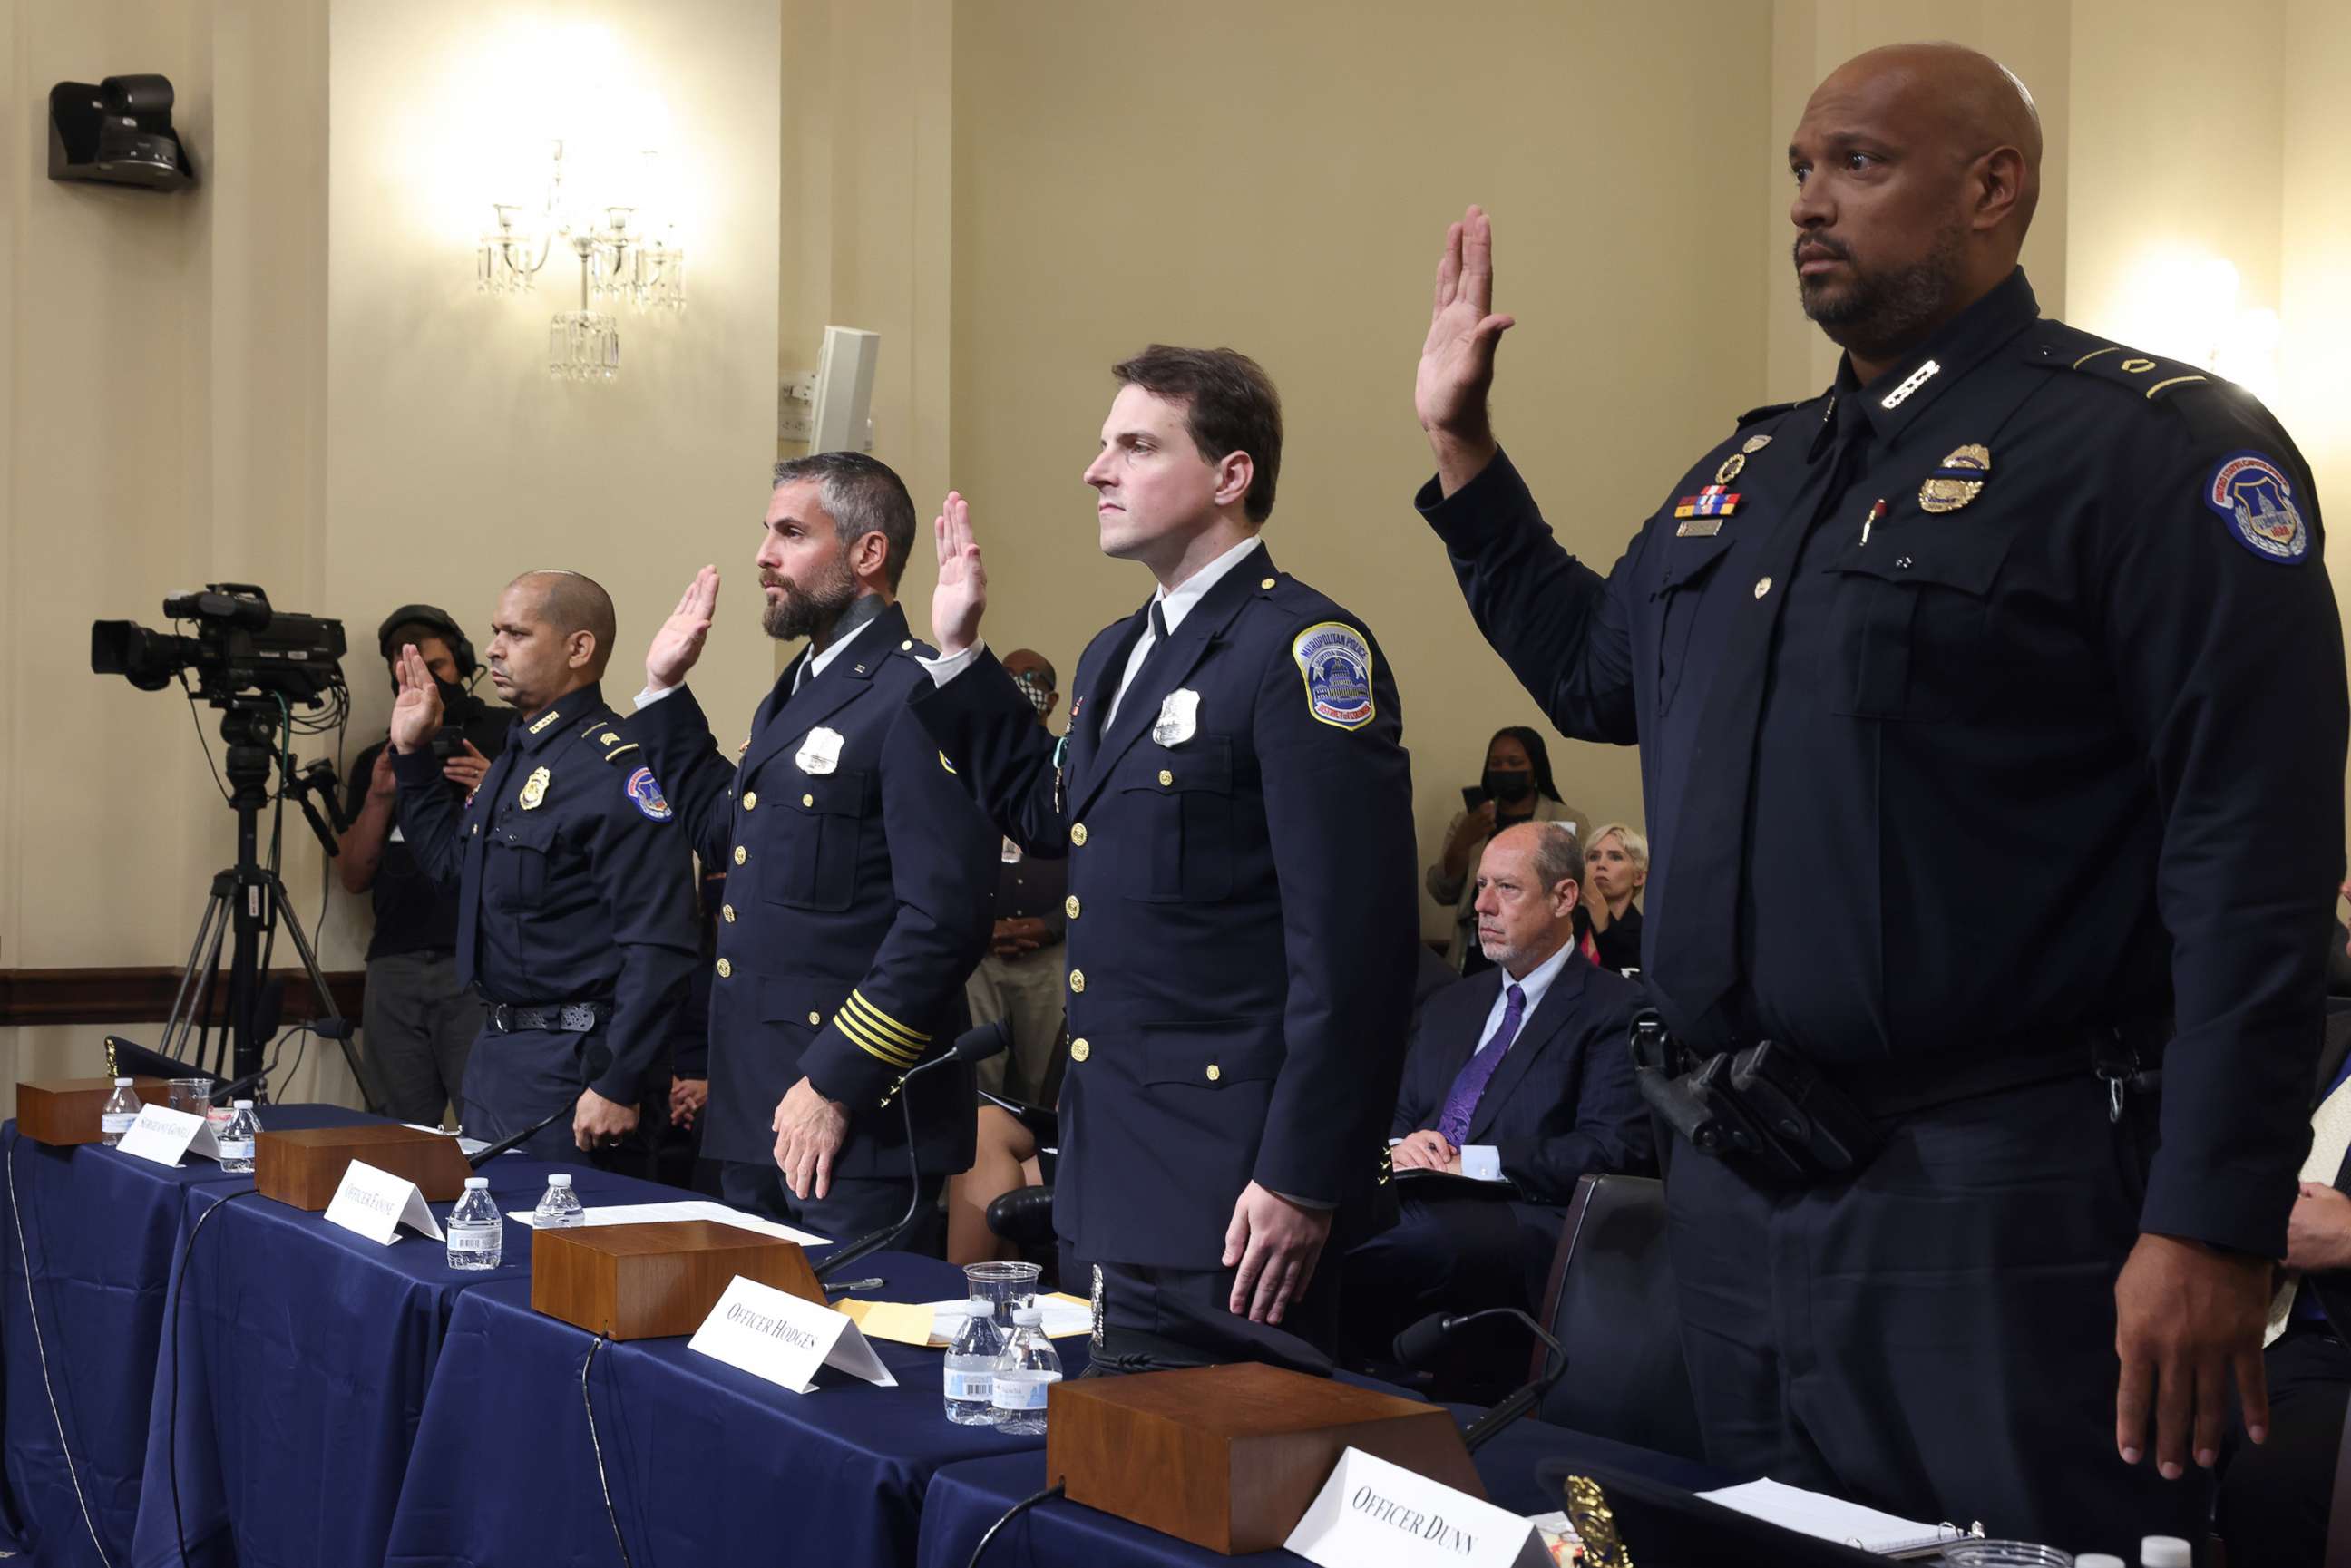 PHOTO: From left, officers Sgt. Aquilino Gonell, Michael Fanone, Daniel Hodges and Harry Dunn, are sworn in to testify before the House Select Committee investigating the January 6 attack on U.S. Capitol on July 27, 2021, in Washington, D.C.